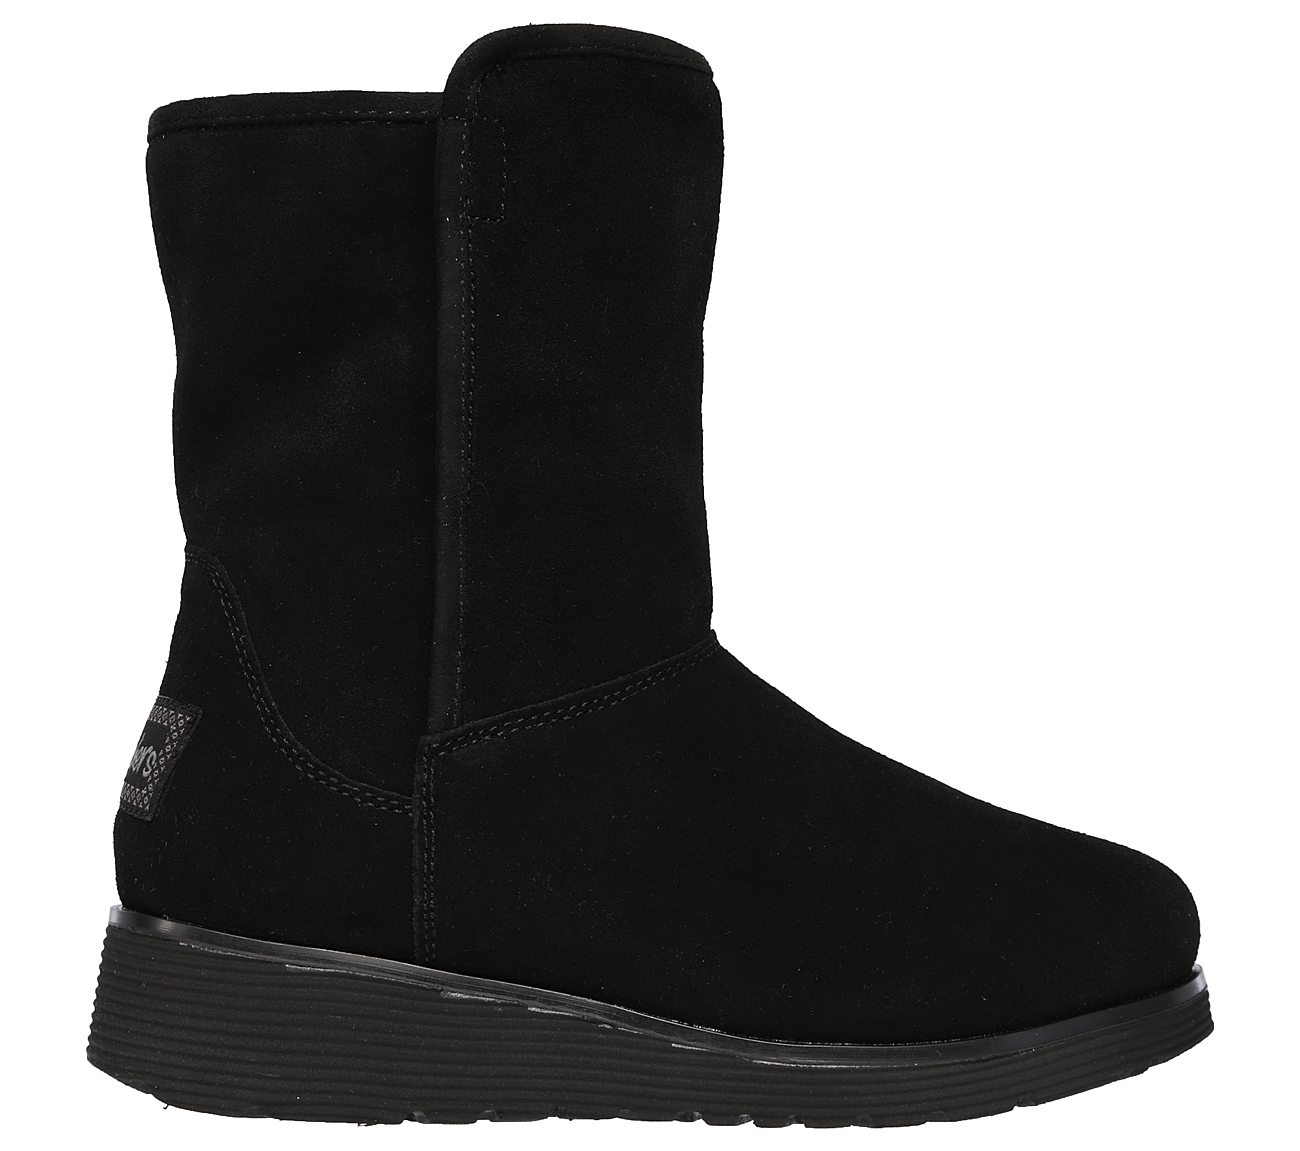 skechers shearling wedge ankle boots